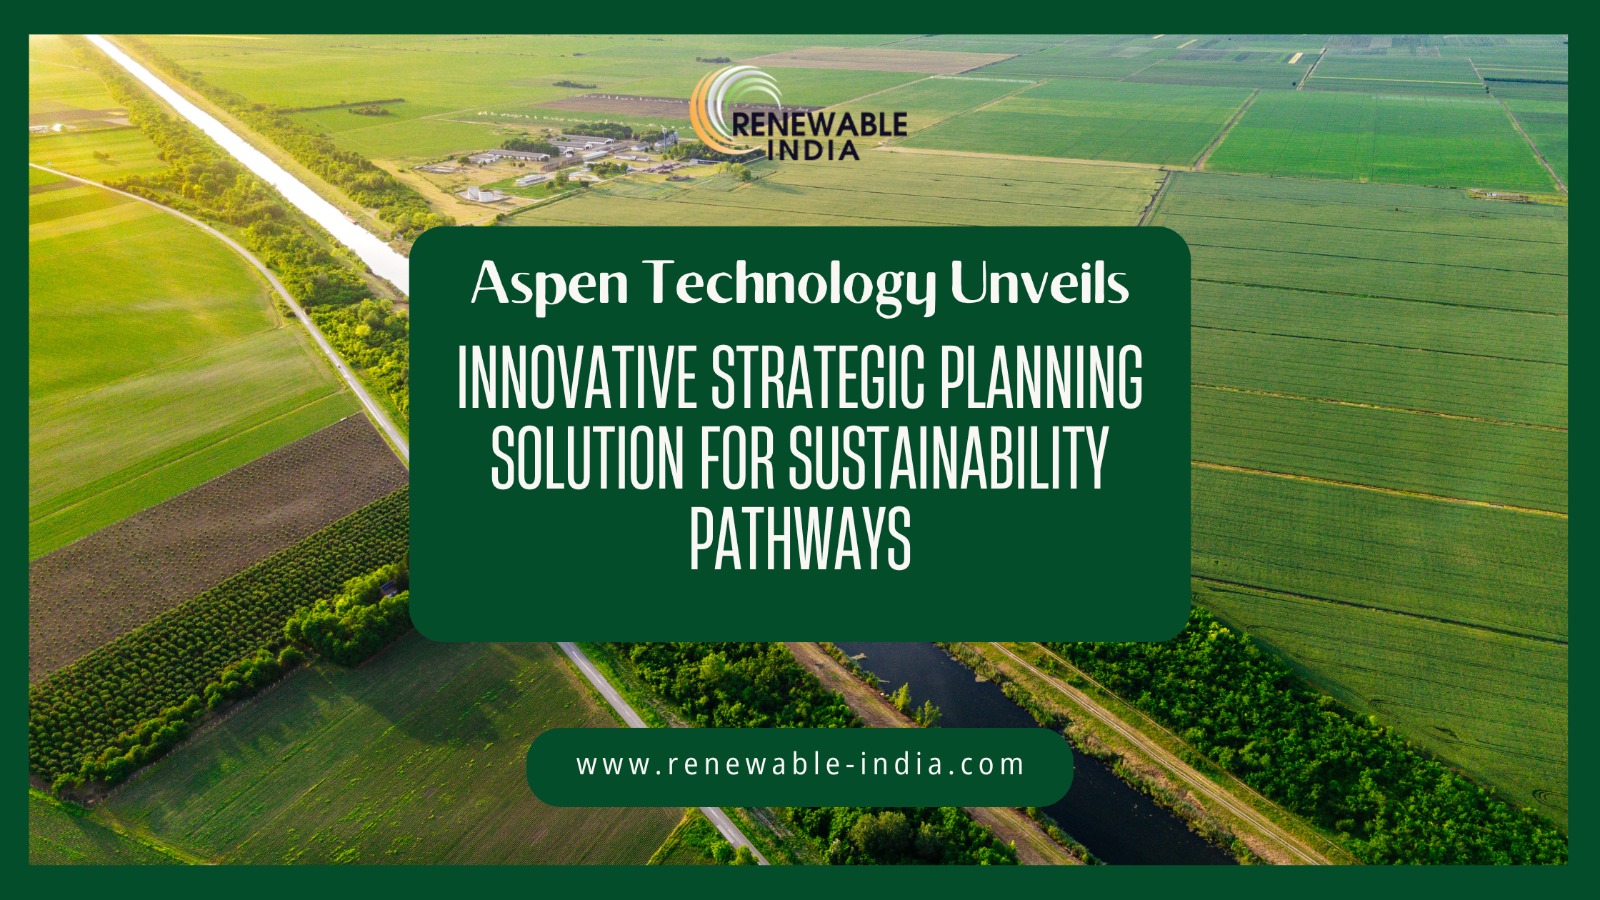 Aspen Technology Introduces New Strategic Planning for Sustainability Pathways Solution